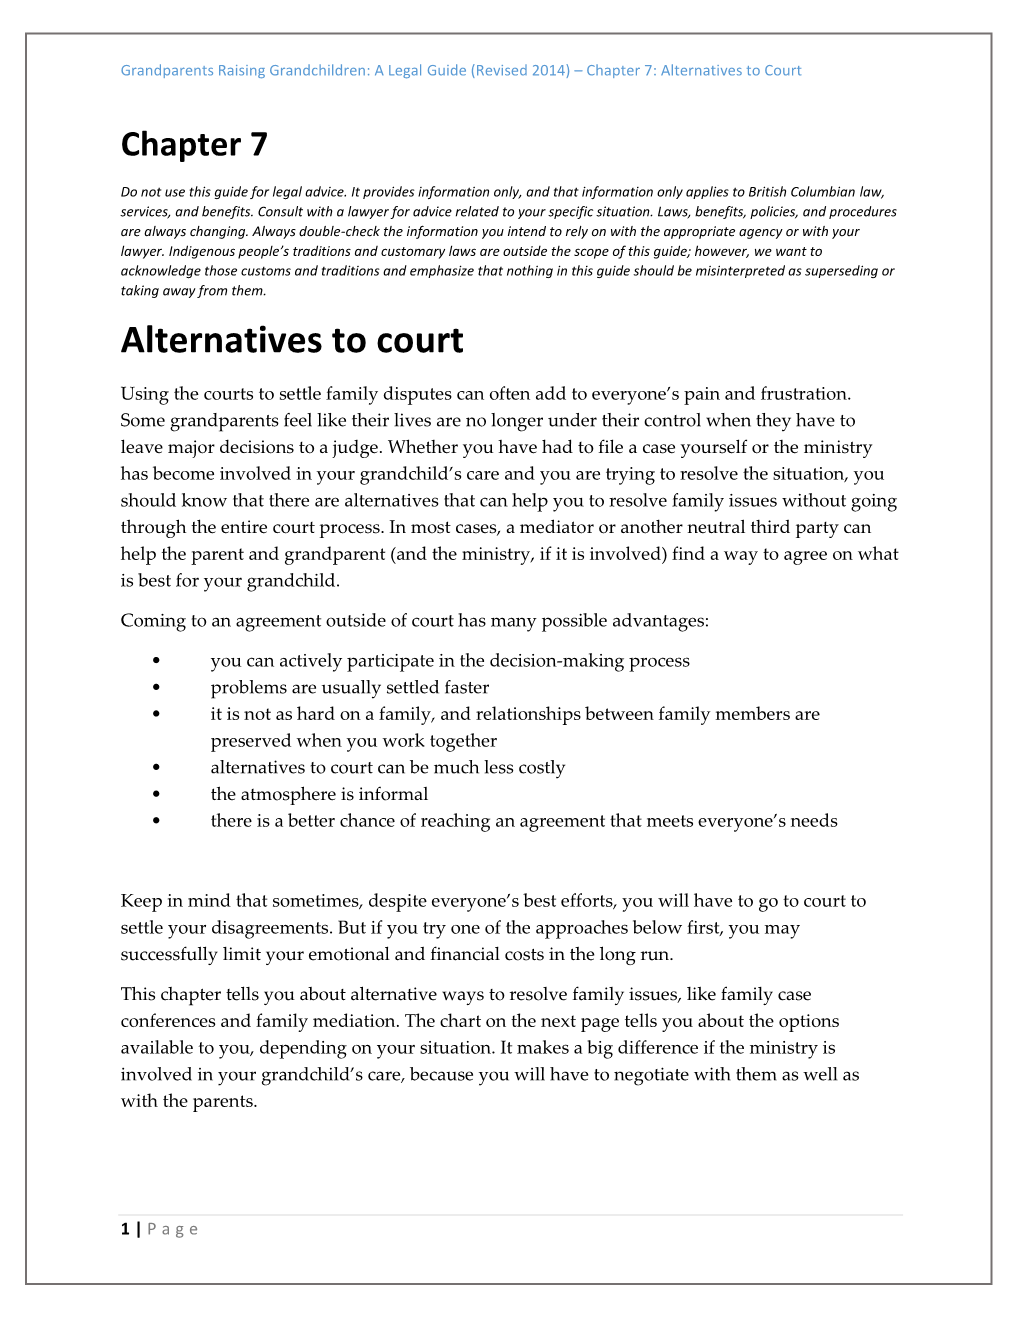 Alternatives to Court – Chapter 7 PDF – Downloadable